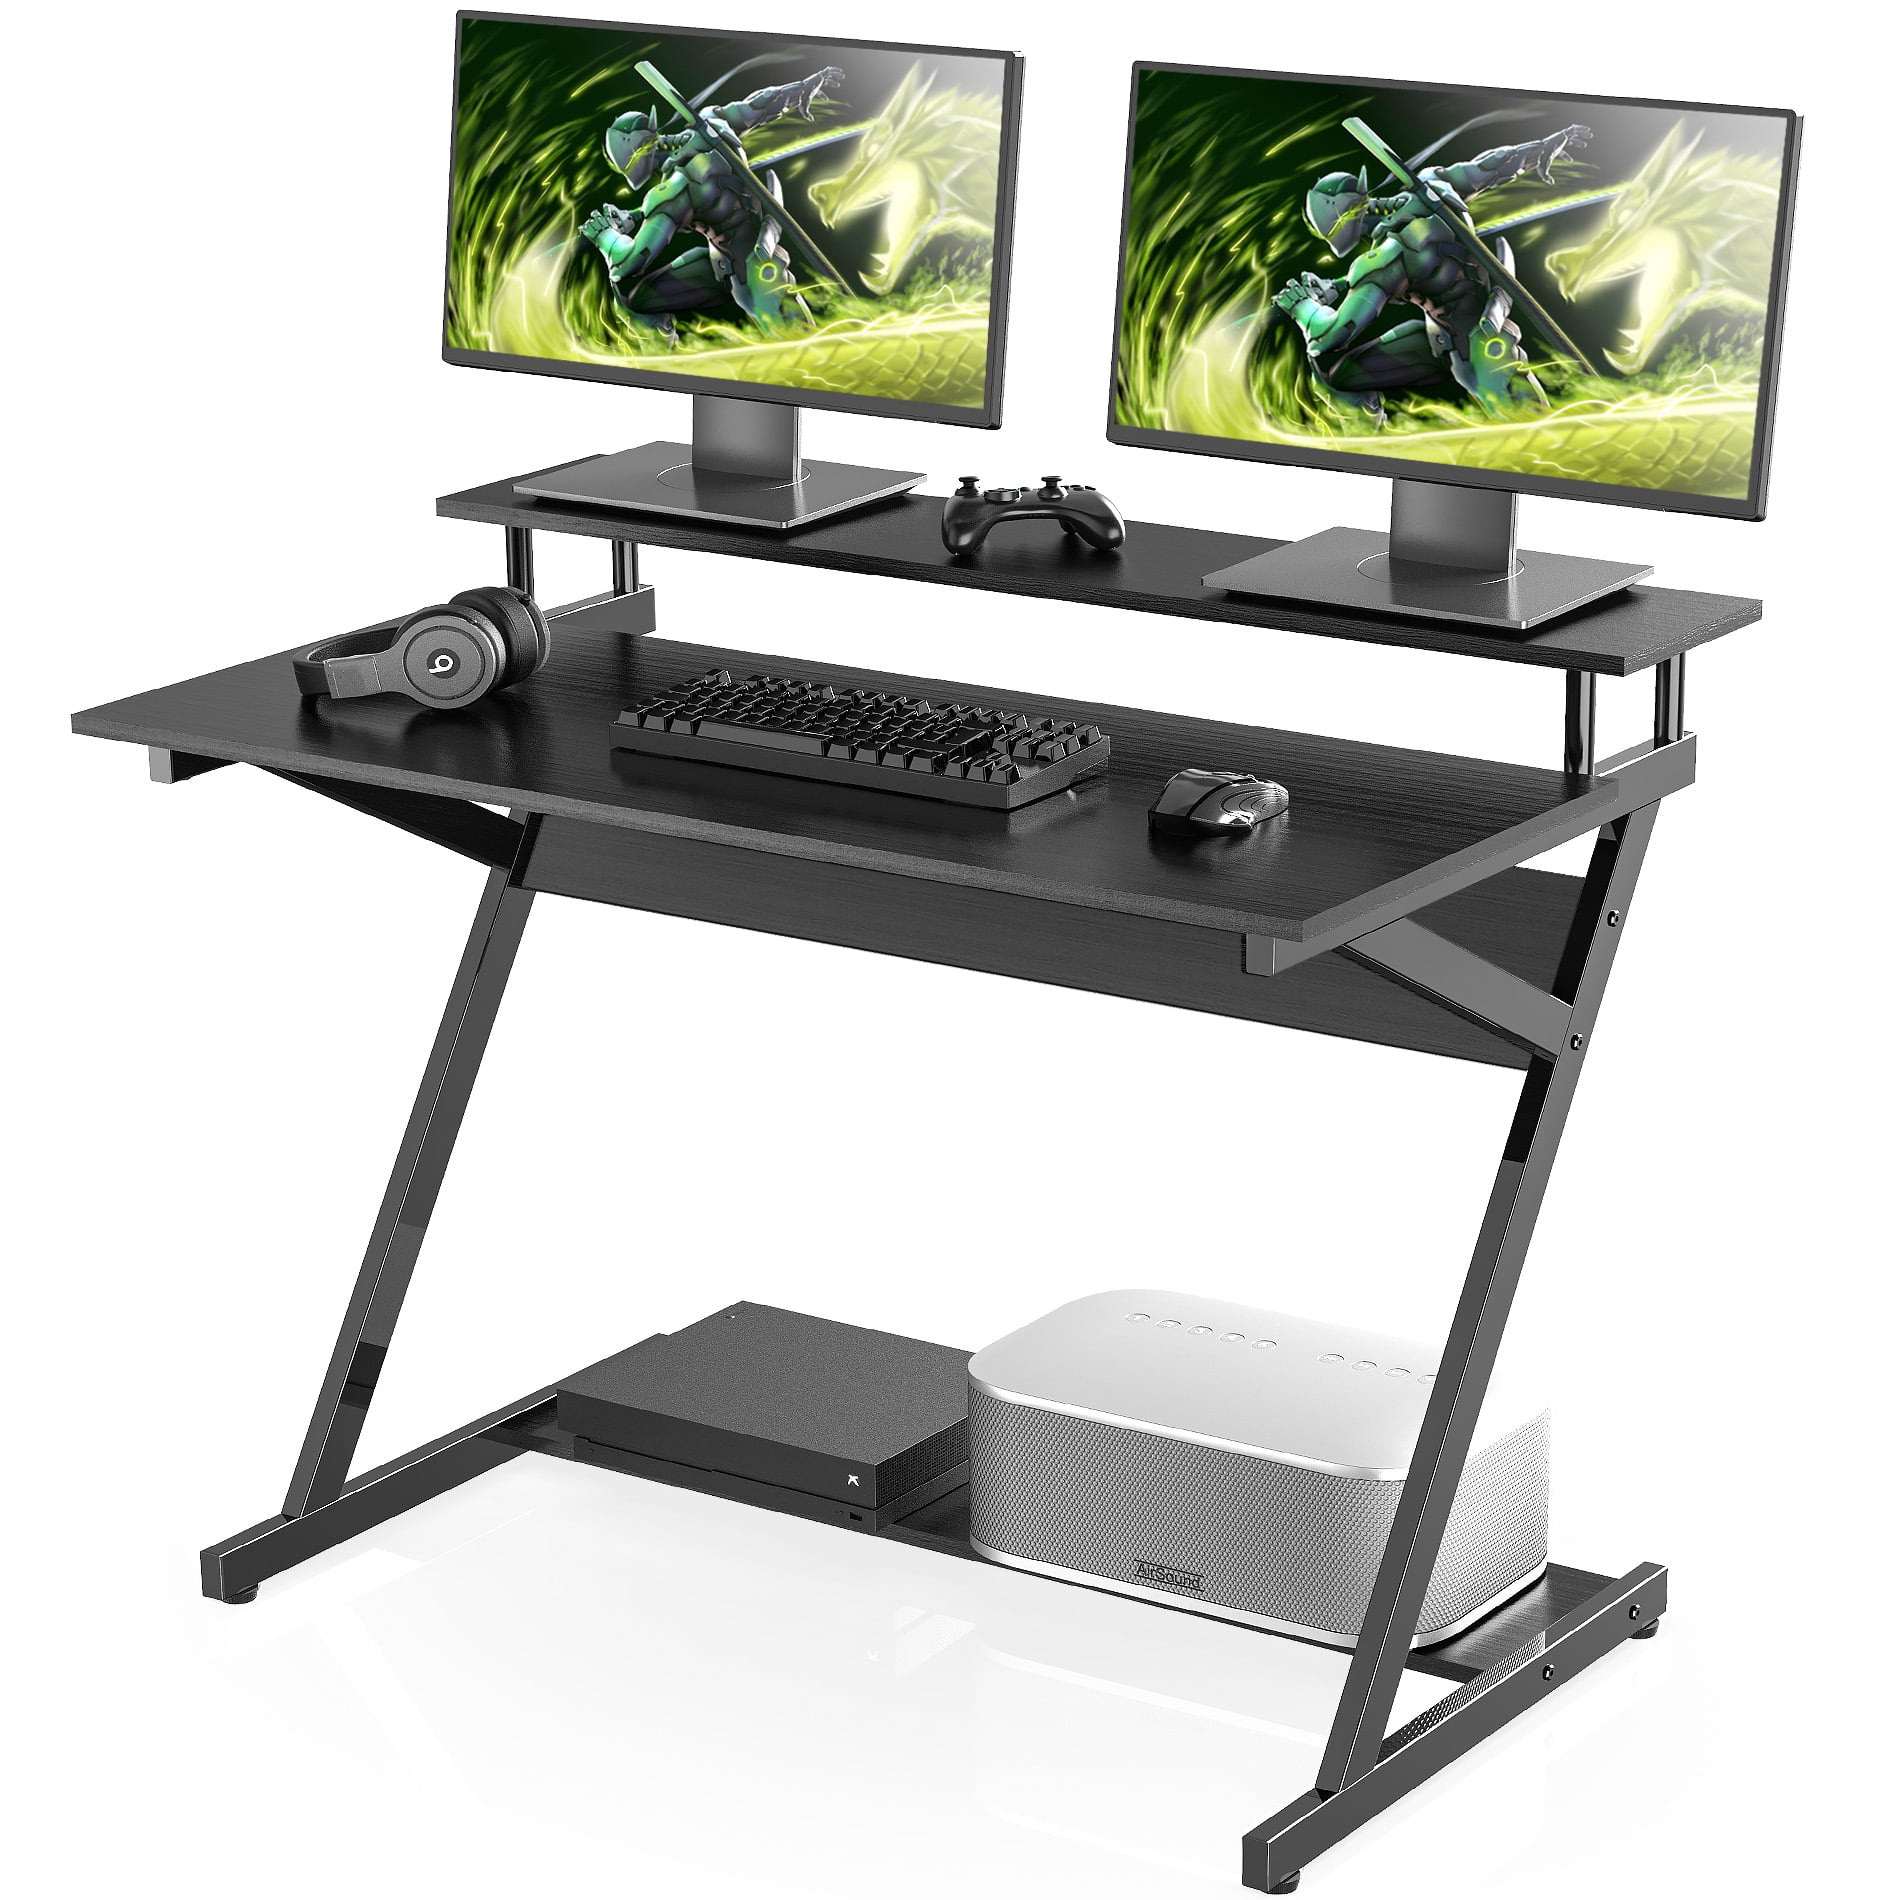 FITUEYES Computer Desk with Monitor Stand,Gaming Table ...